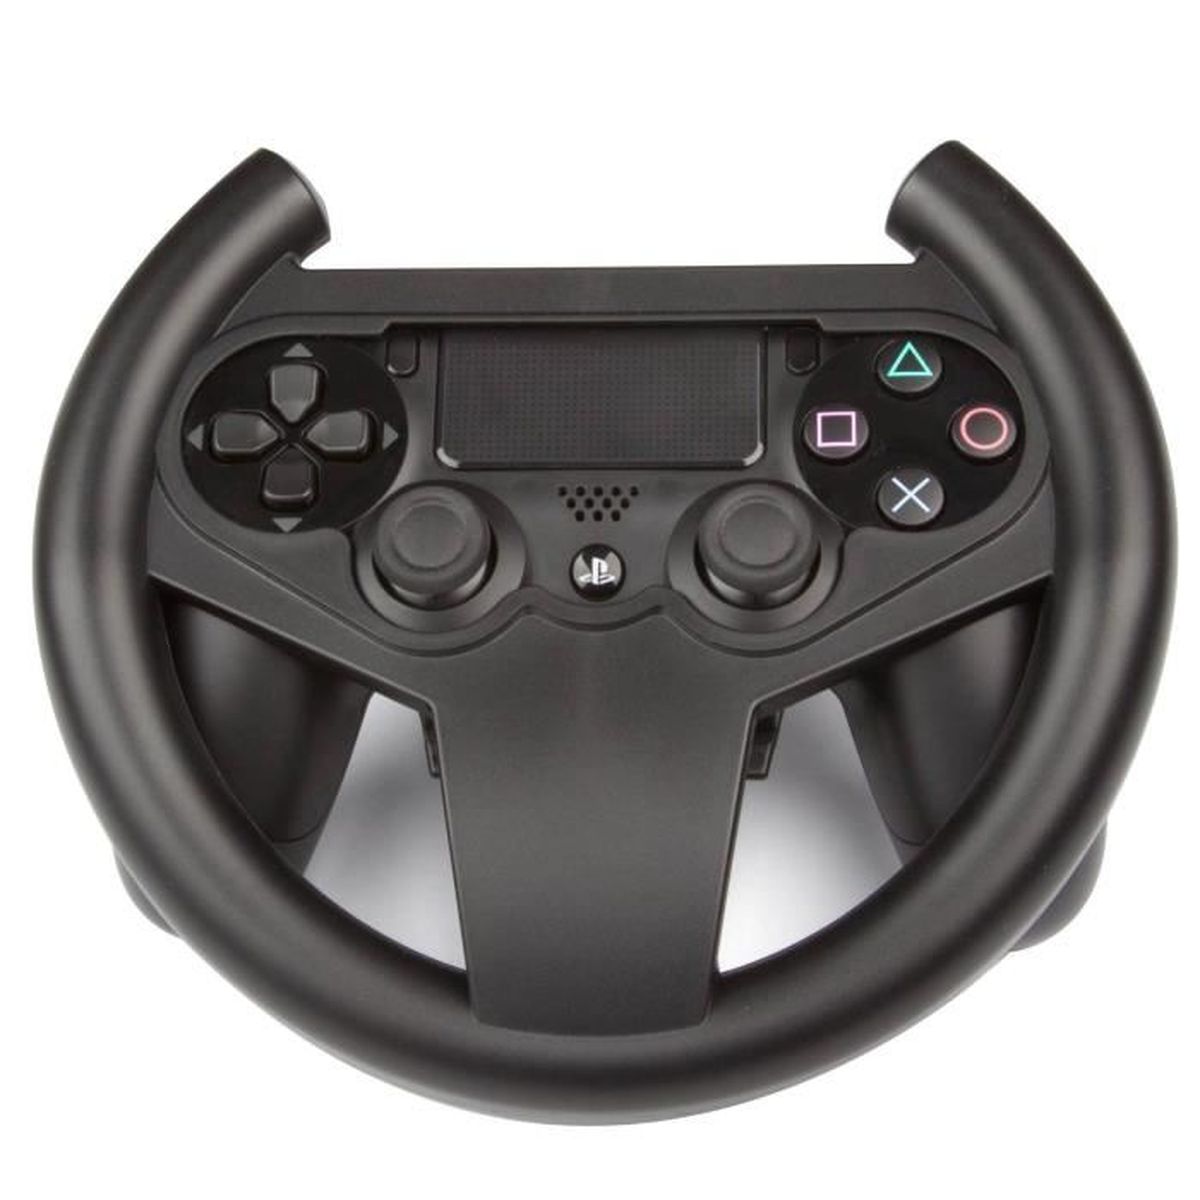 Volant. Gaming Wheel for playing games. Nfs джойстик